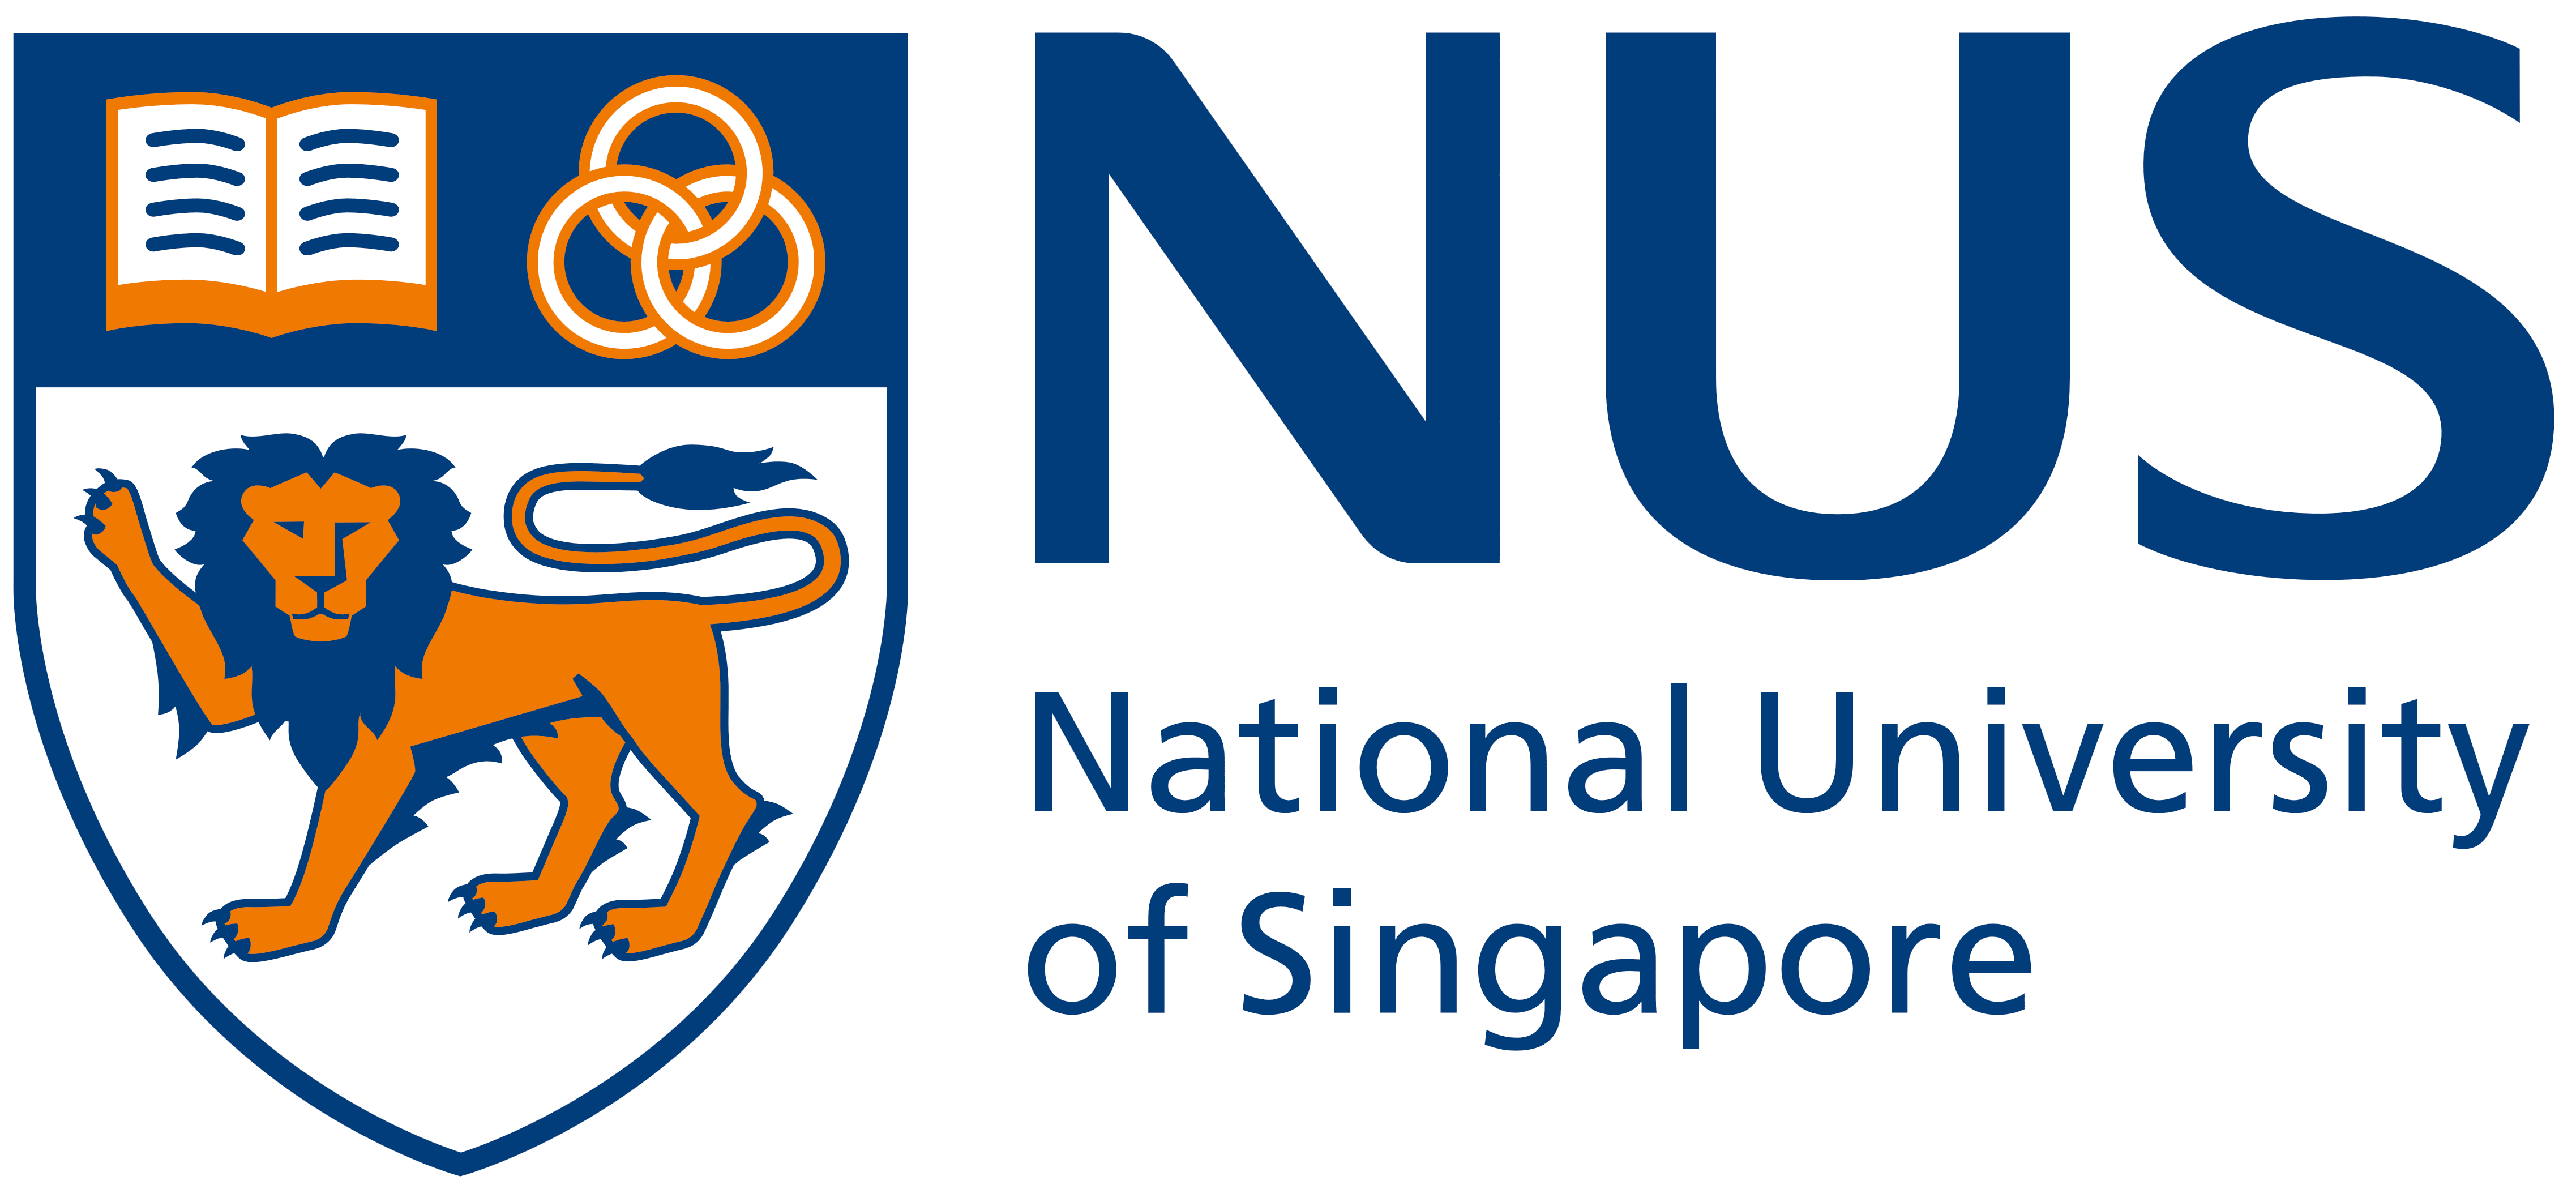 The logo of NUS, where Sankalp Sangle did his thesis